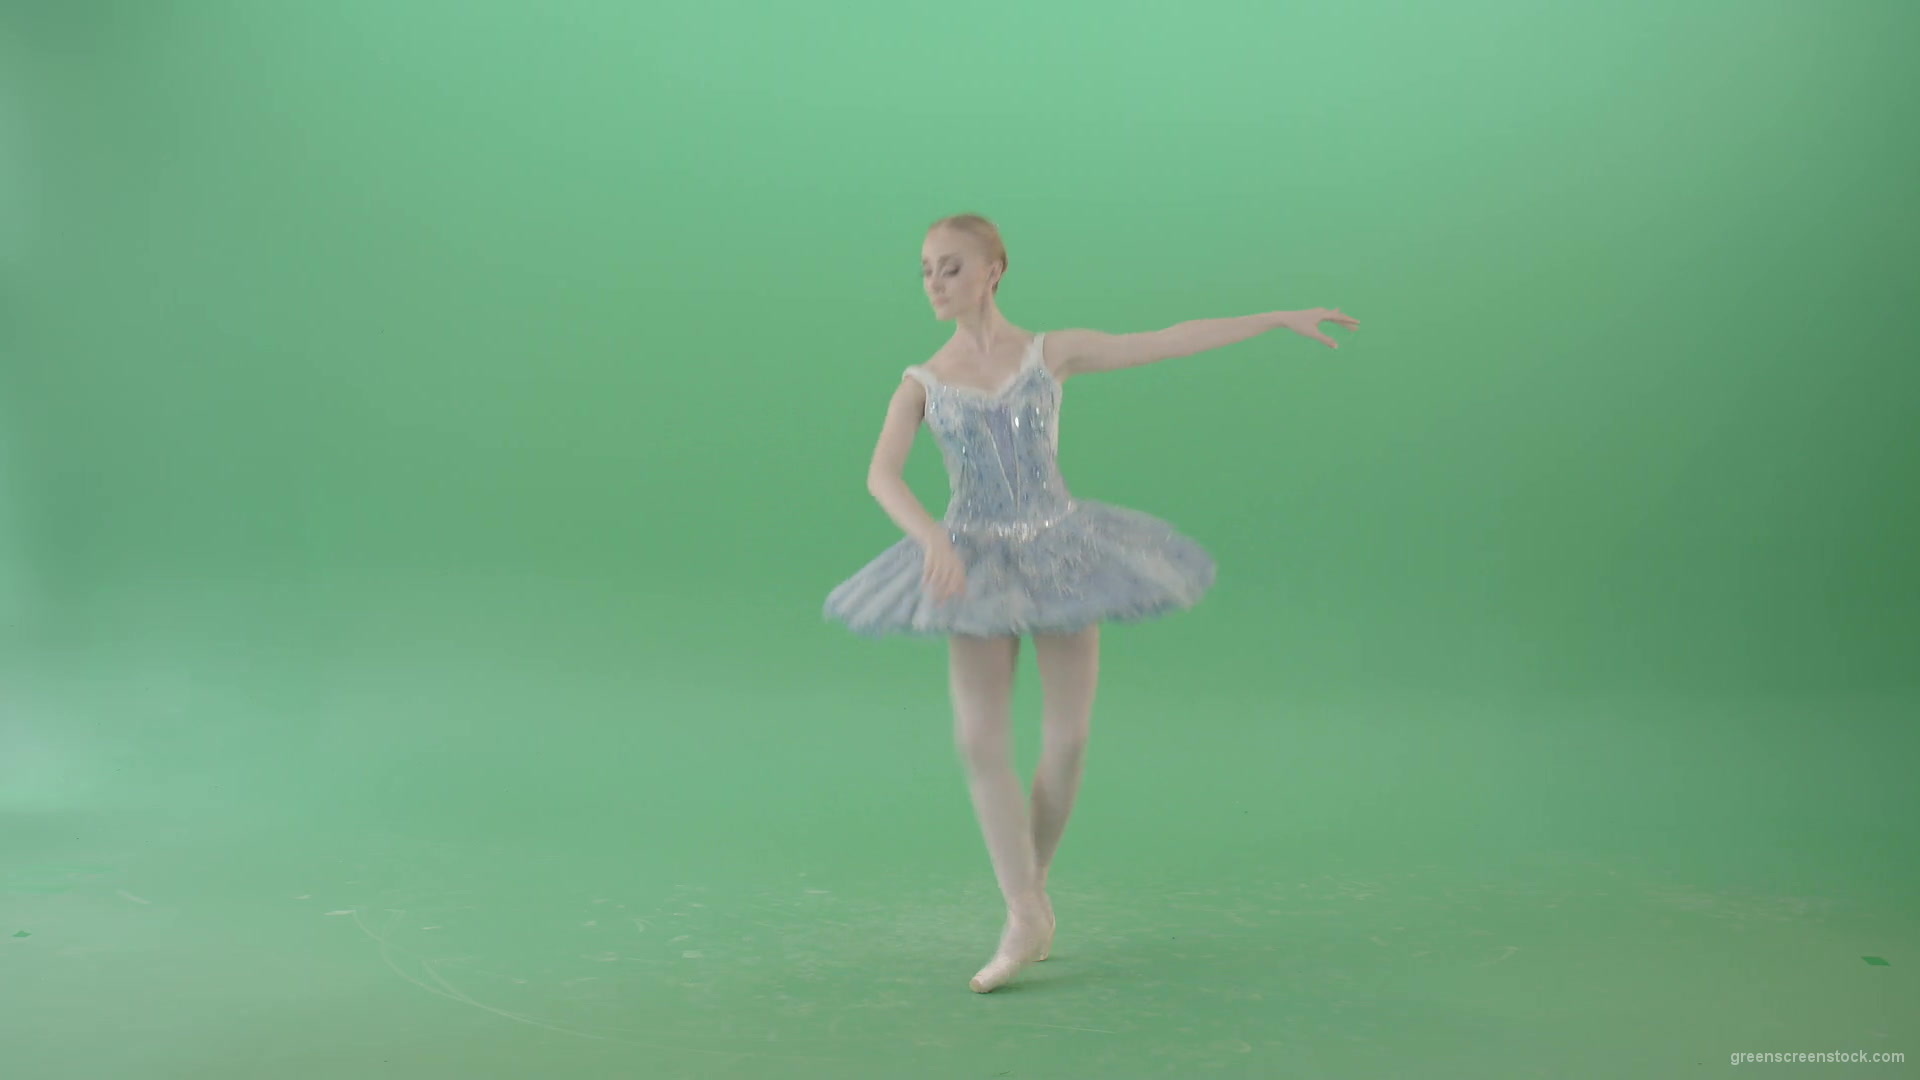 Christmas-story-baller-dancing-girl-in-blue-ballerin-dress-performing-isolated-on-green-screen-4K-Video-Footage-1920_007 Green Screen Stock